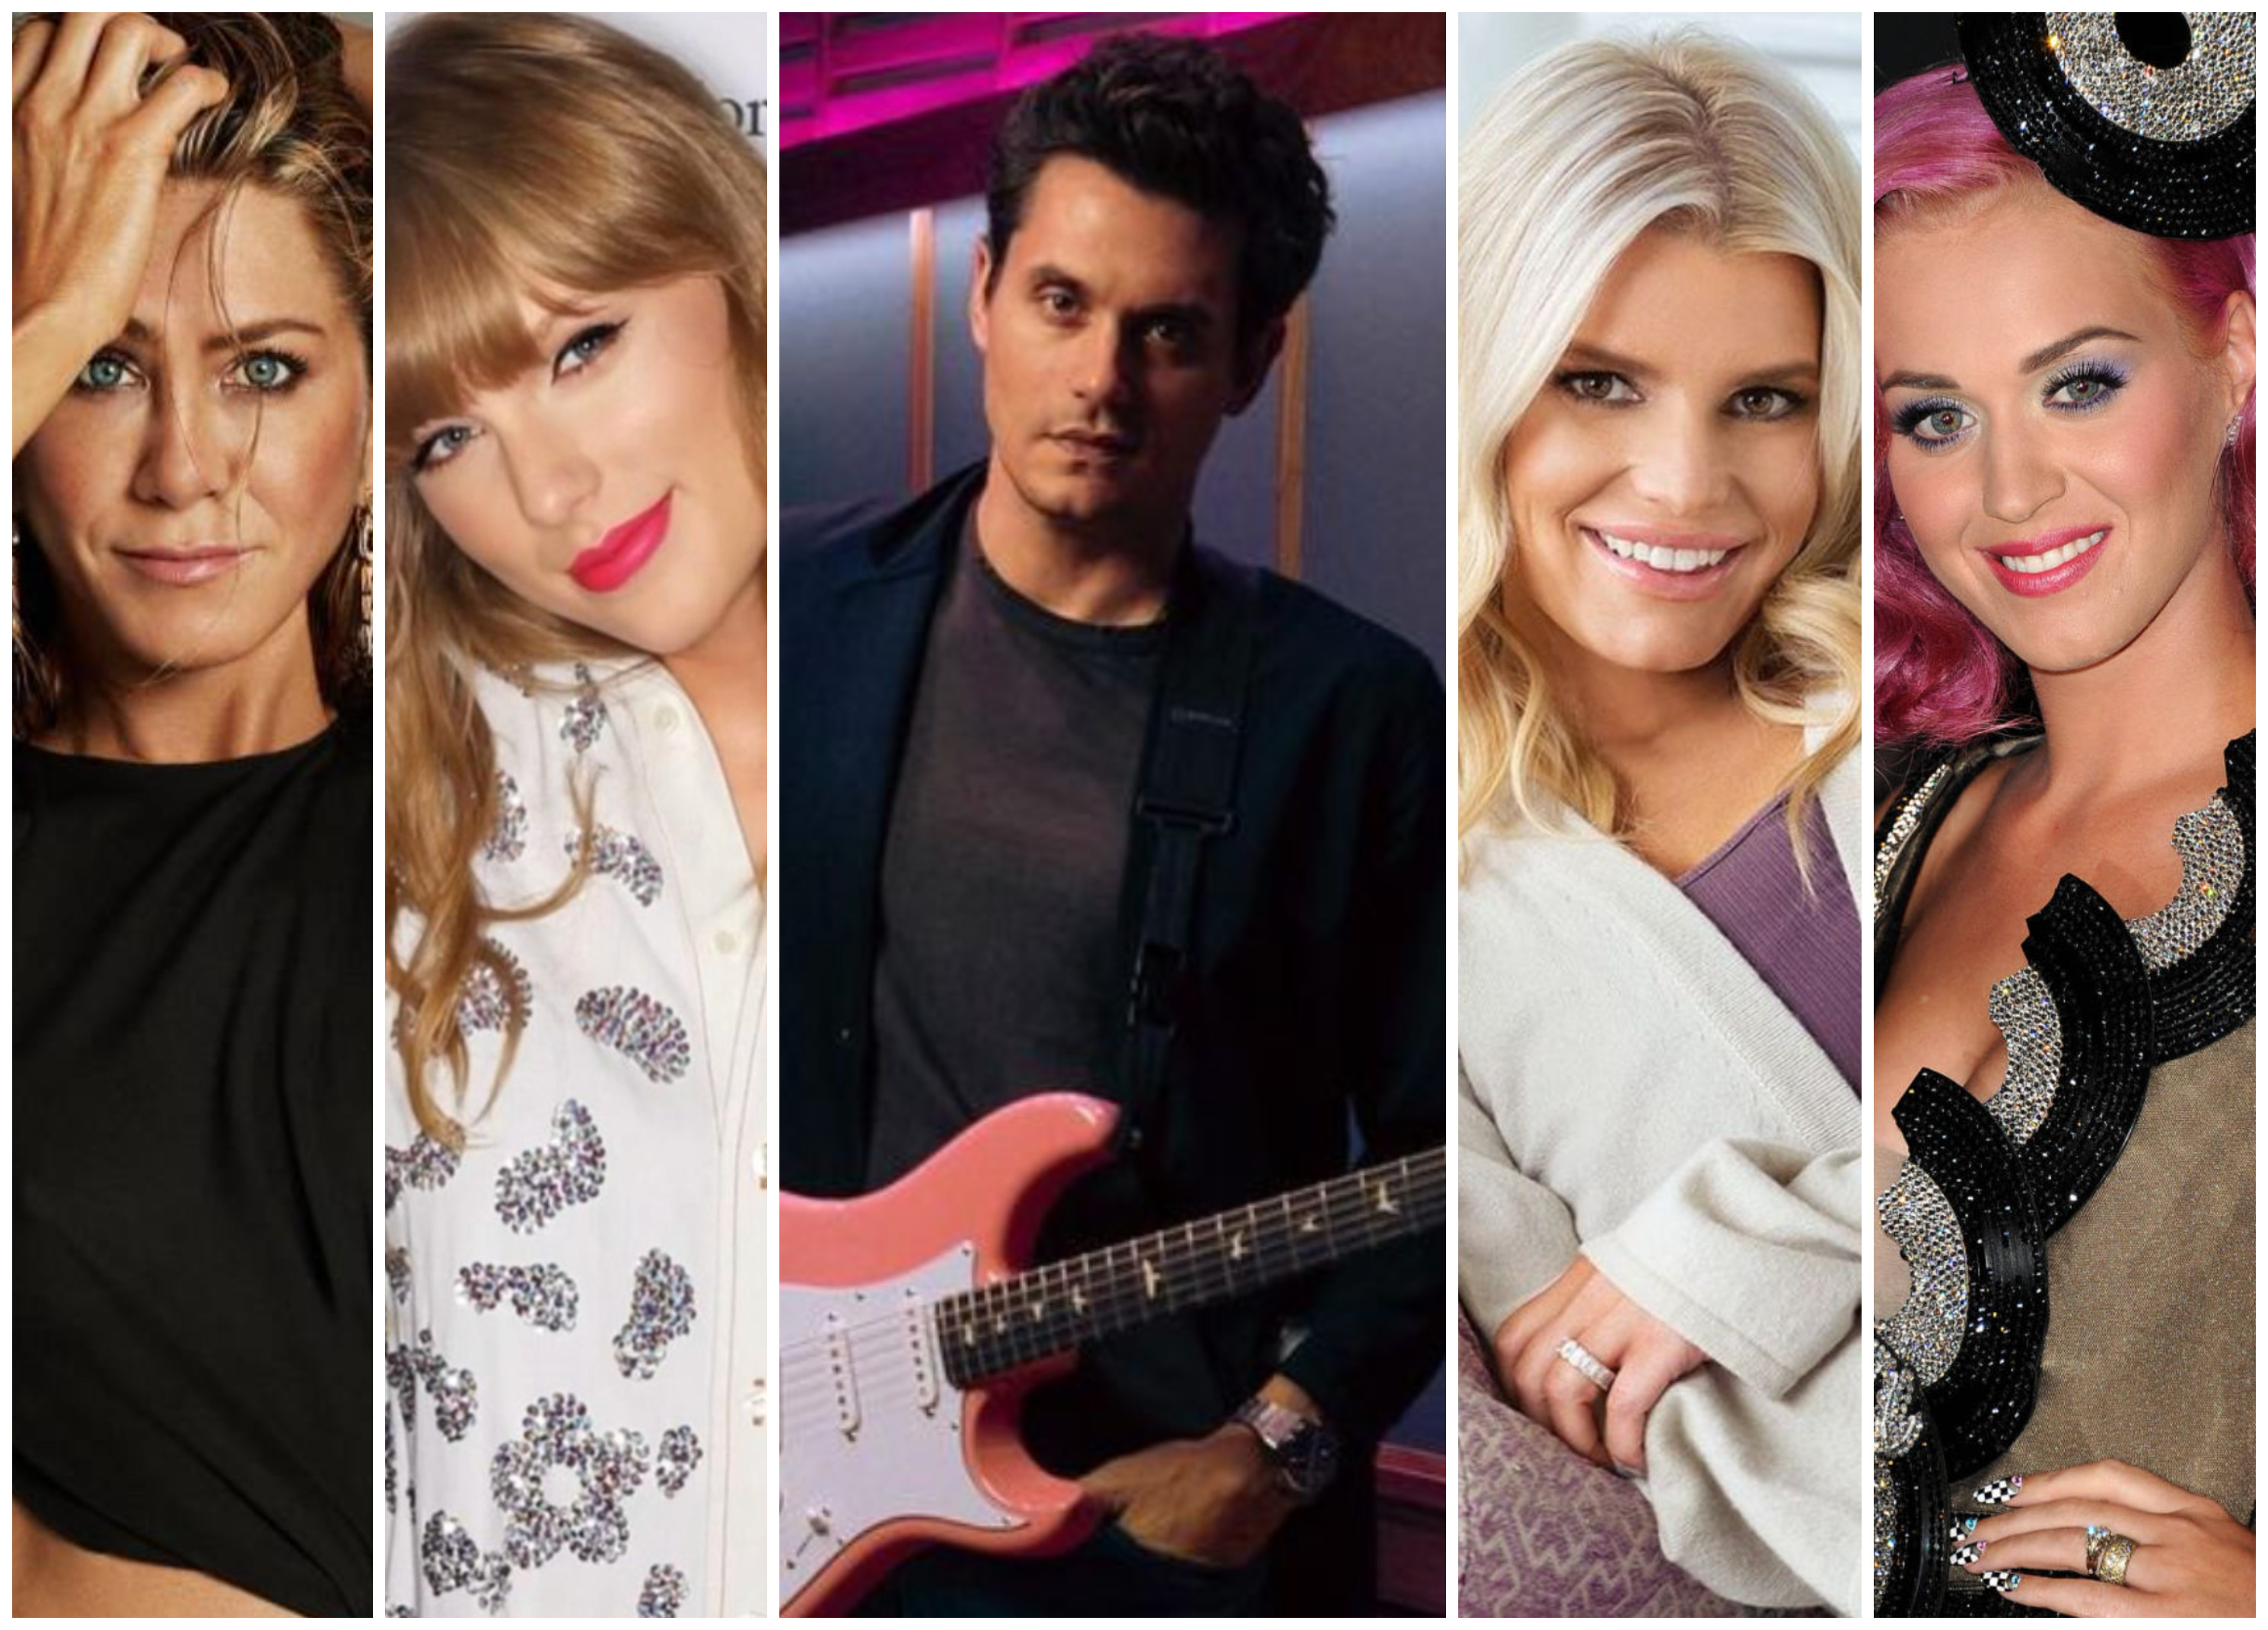 Jennifer Aniston, Taylor Swift, Gracie Hunt and Jessica Simpson have all been romantically linked to John Mayer in the past. Photos: @jenniferaniston, @graciehunt, @johnmayer, @jessicasimpson/Instagram; Getty Images